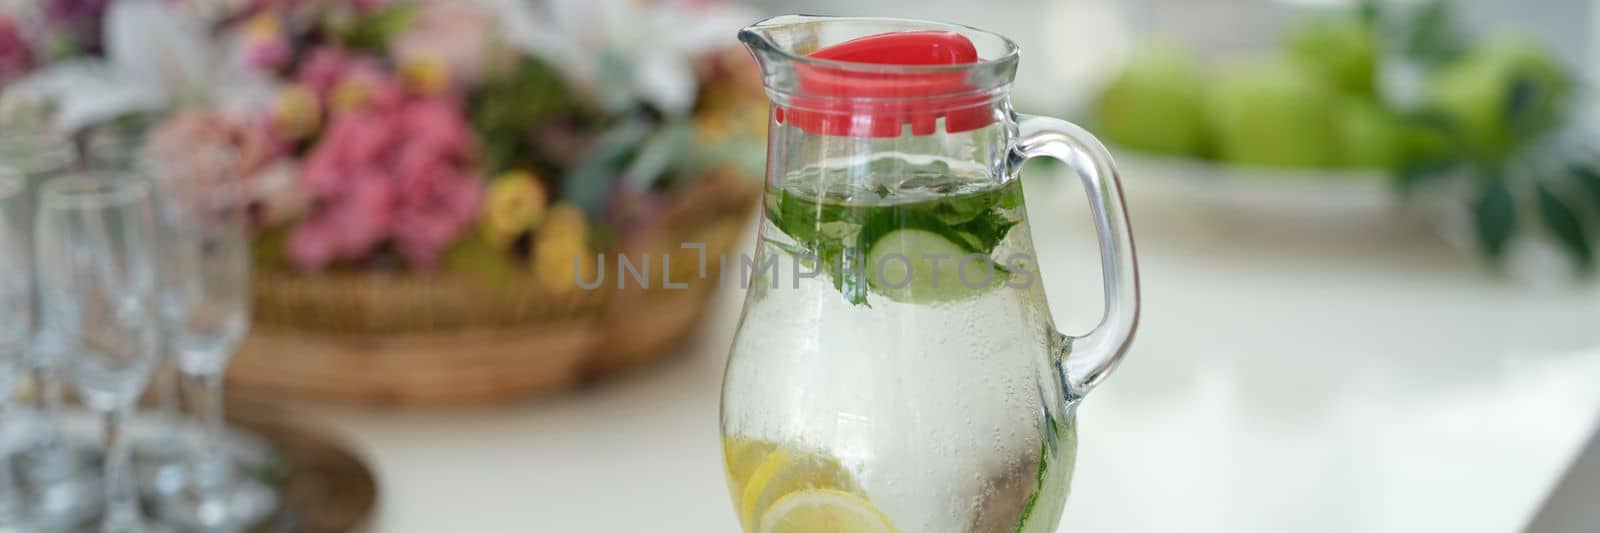 Infused detox water with cucumber, lemon and mint in jug on table. Diet healthy eating and weight loss concept